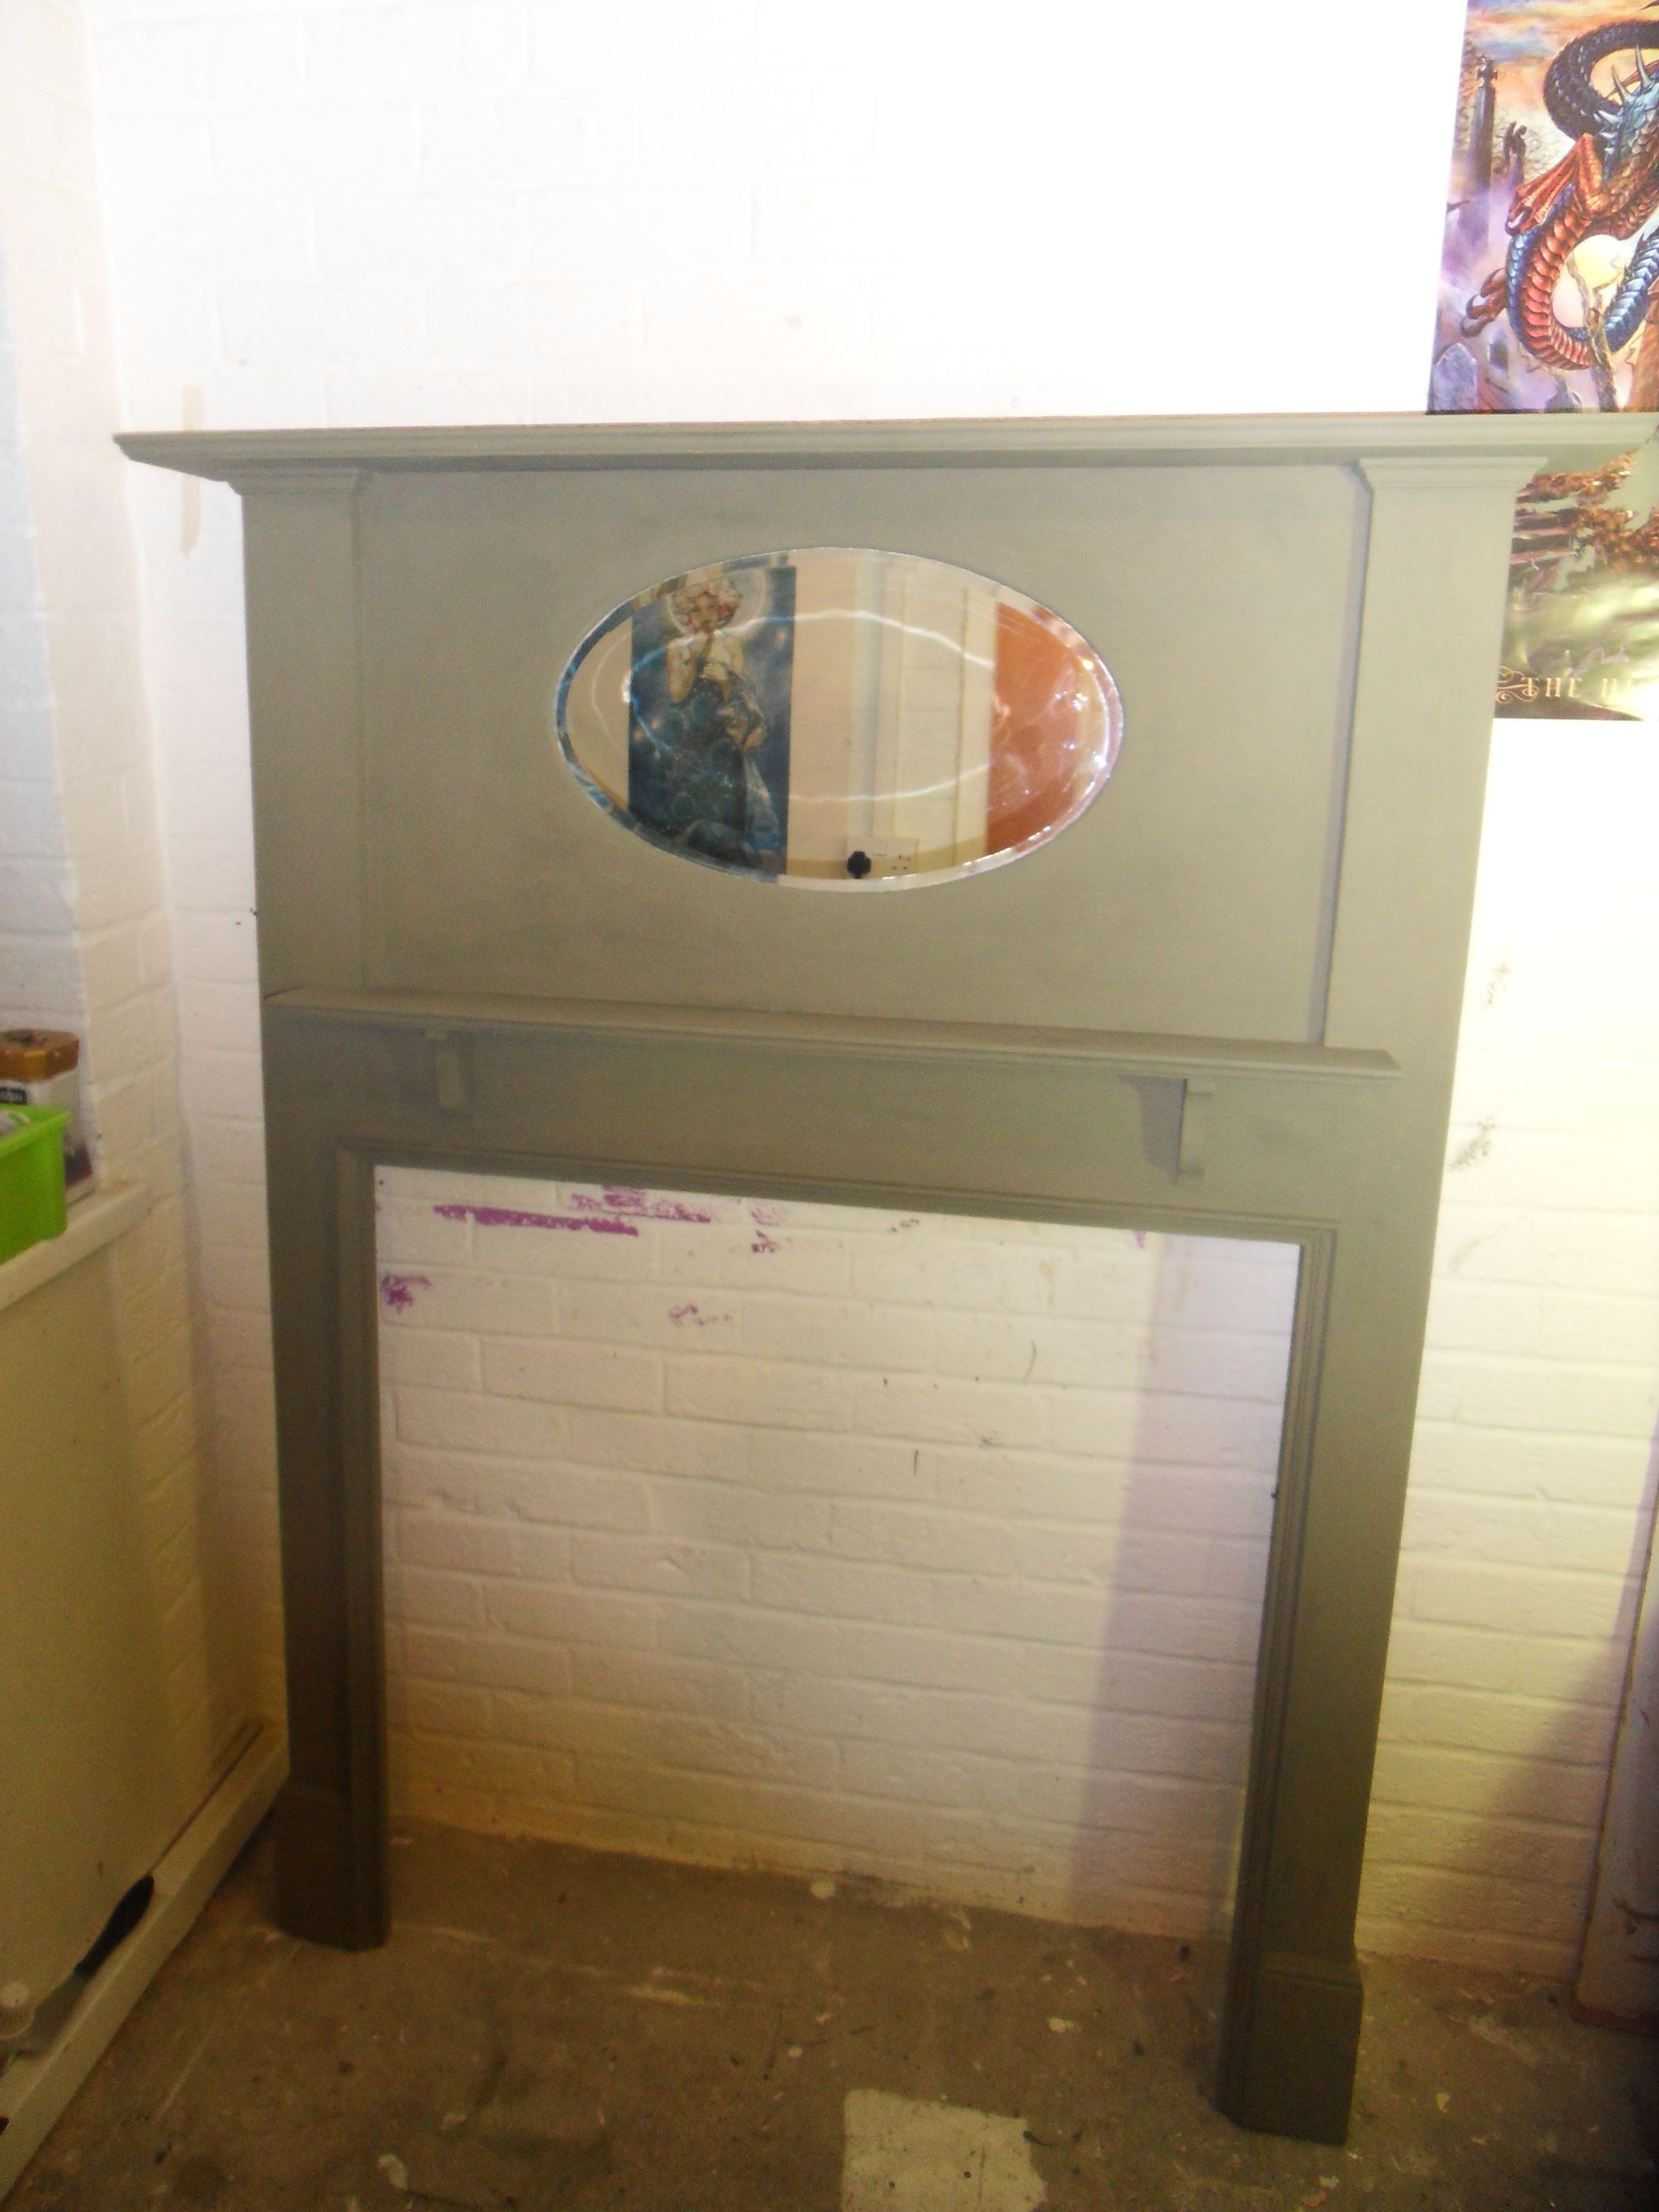 Mirrored Fireplace New Vintage Fire Surround with Oval Mirror now Painted In